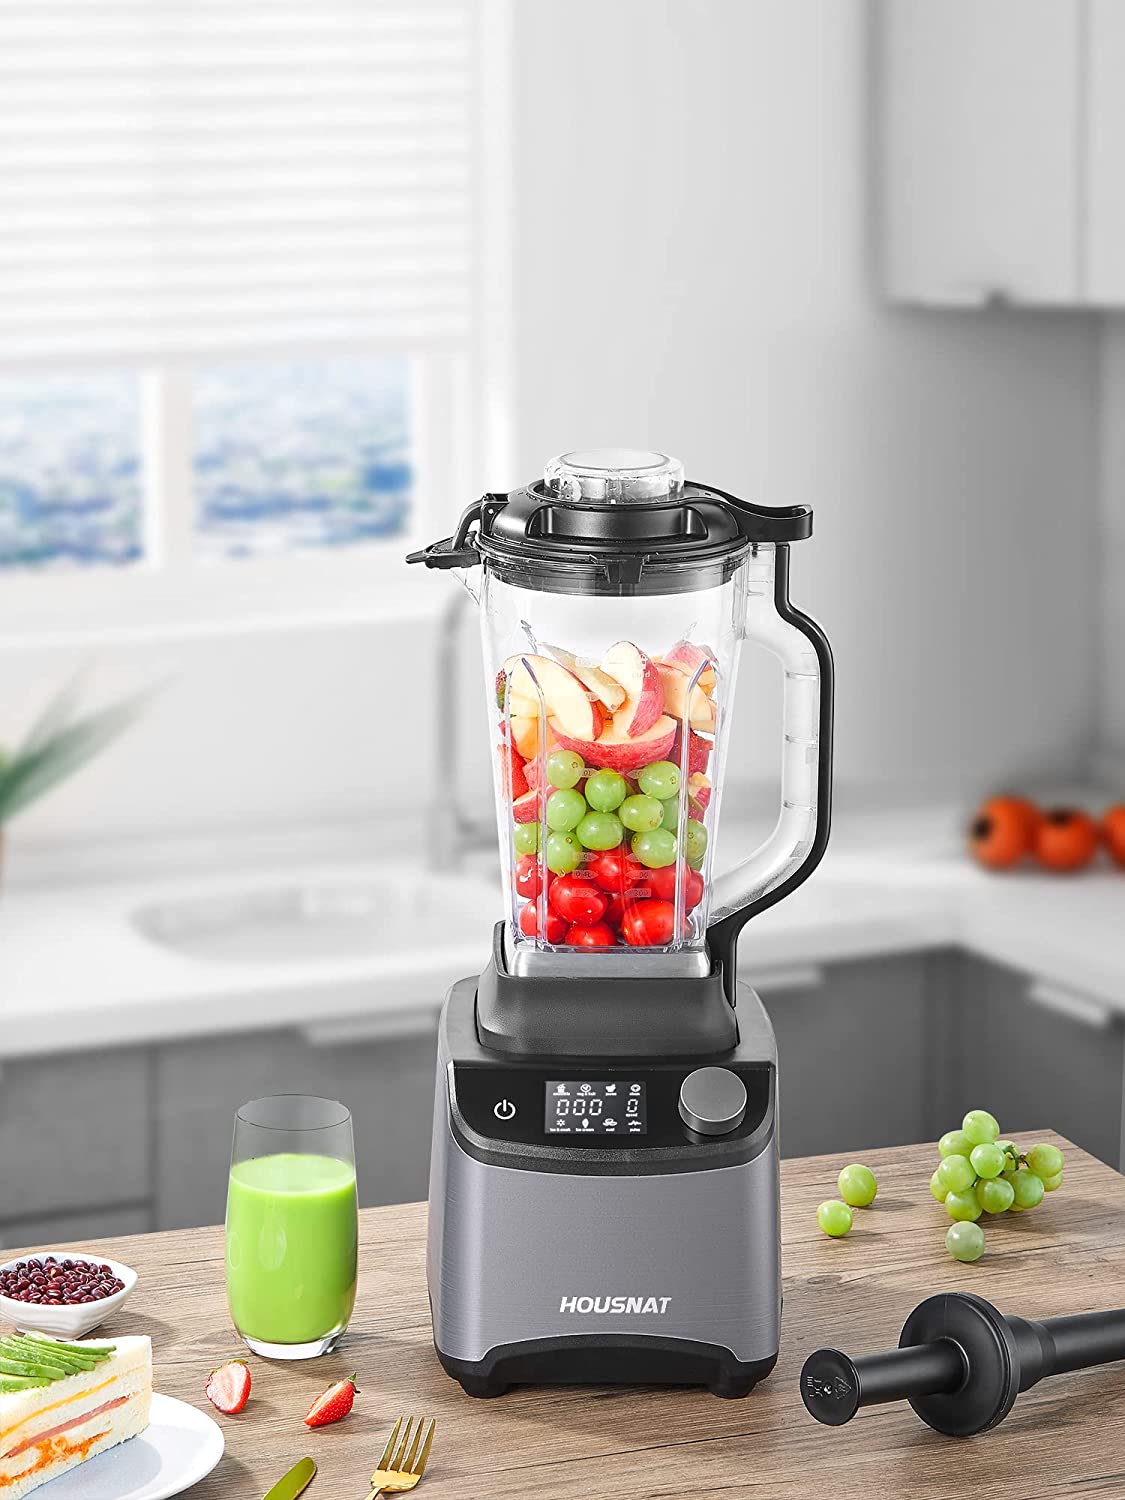 Smoothie Blender, Blender for Shakes and Smoothies, 1200W